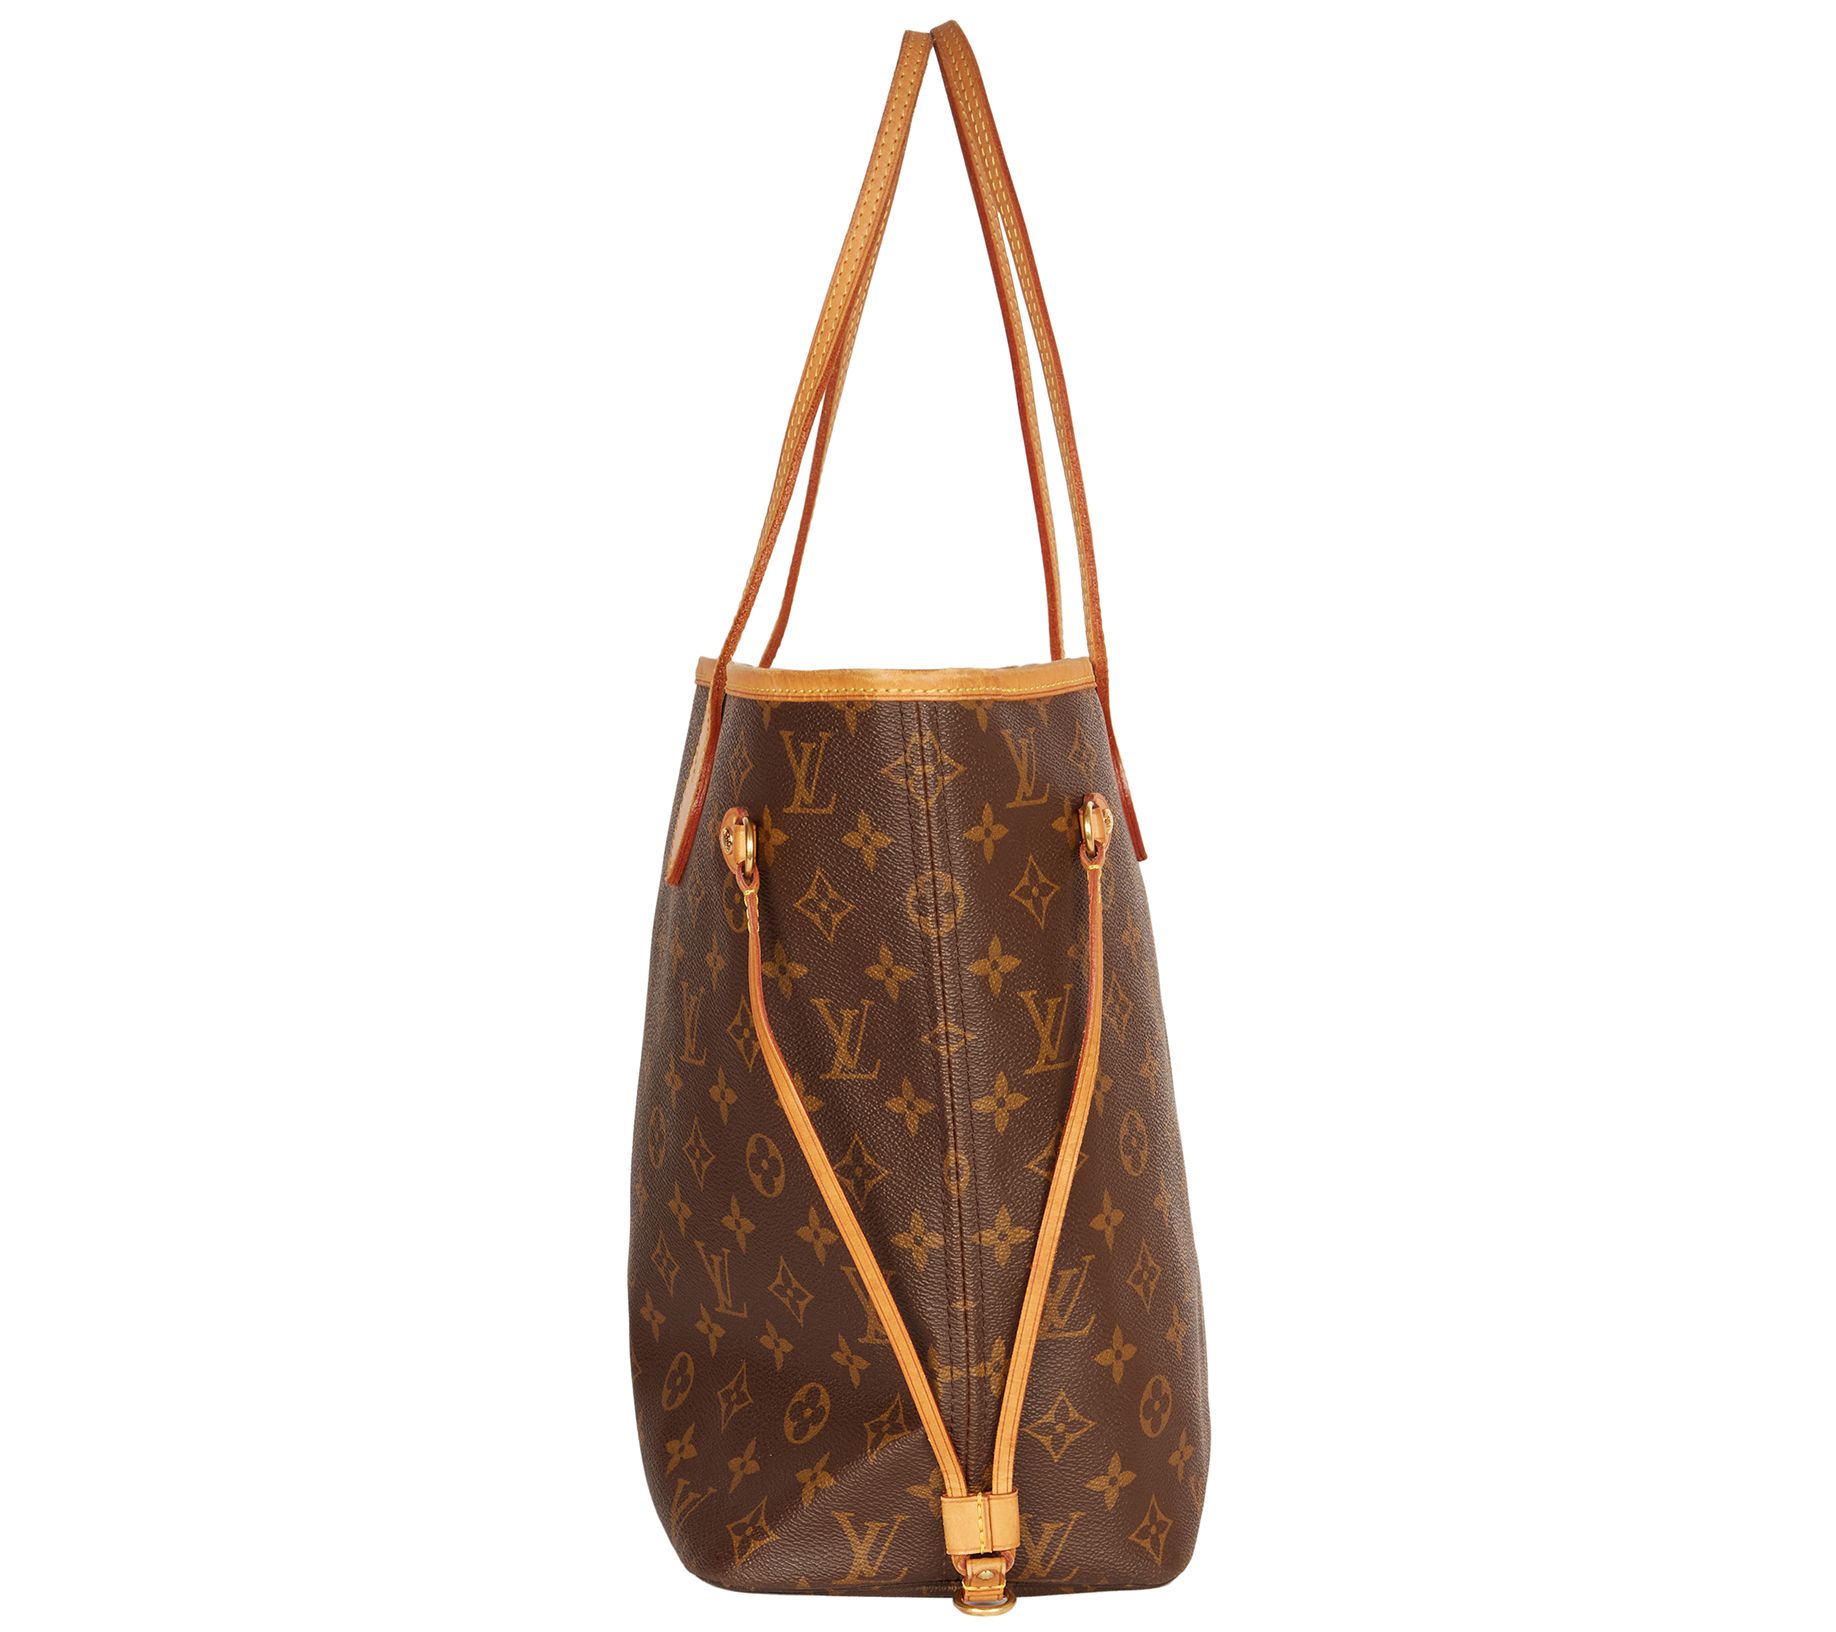 Authenticated Used Louis Vuitton Neverfull MM Tote Bag M45679 Monogram  Giant/By The Pool 